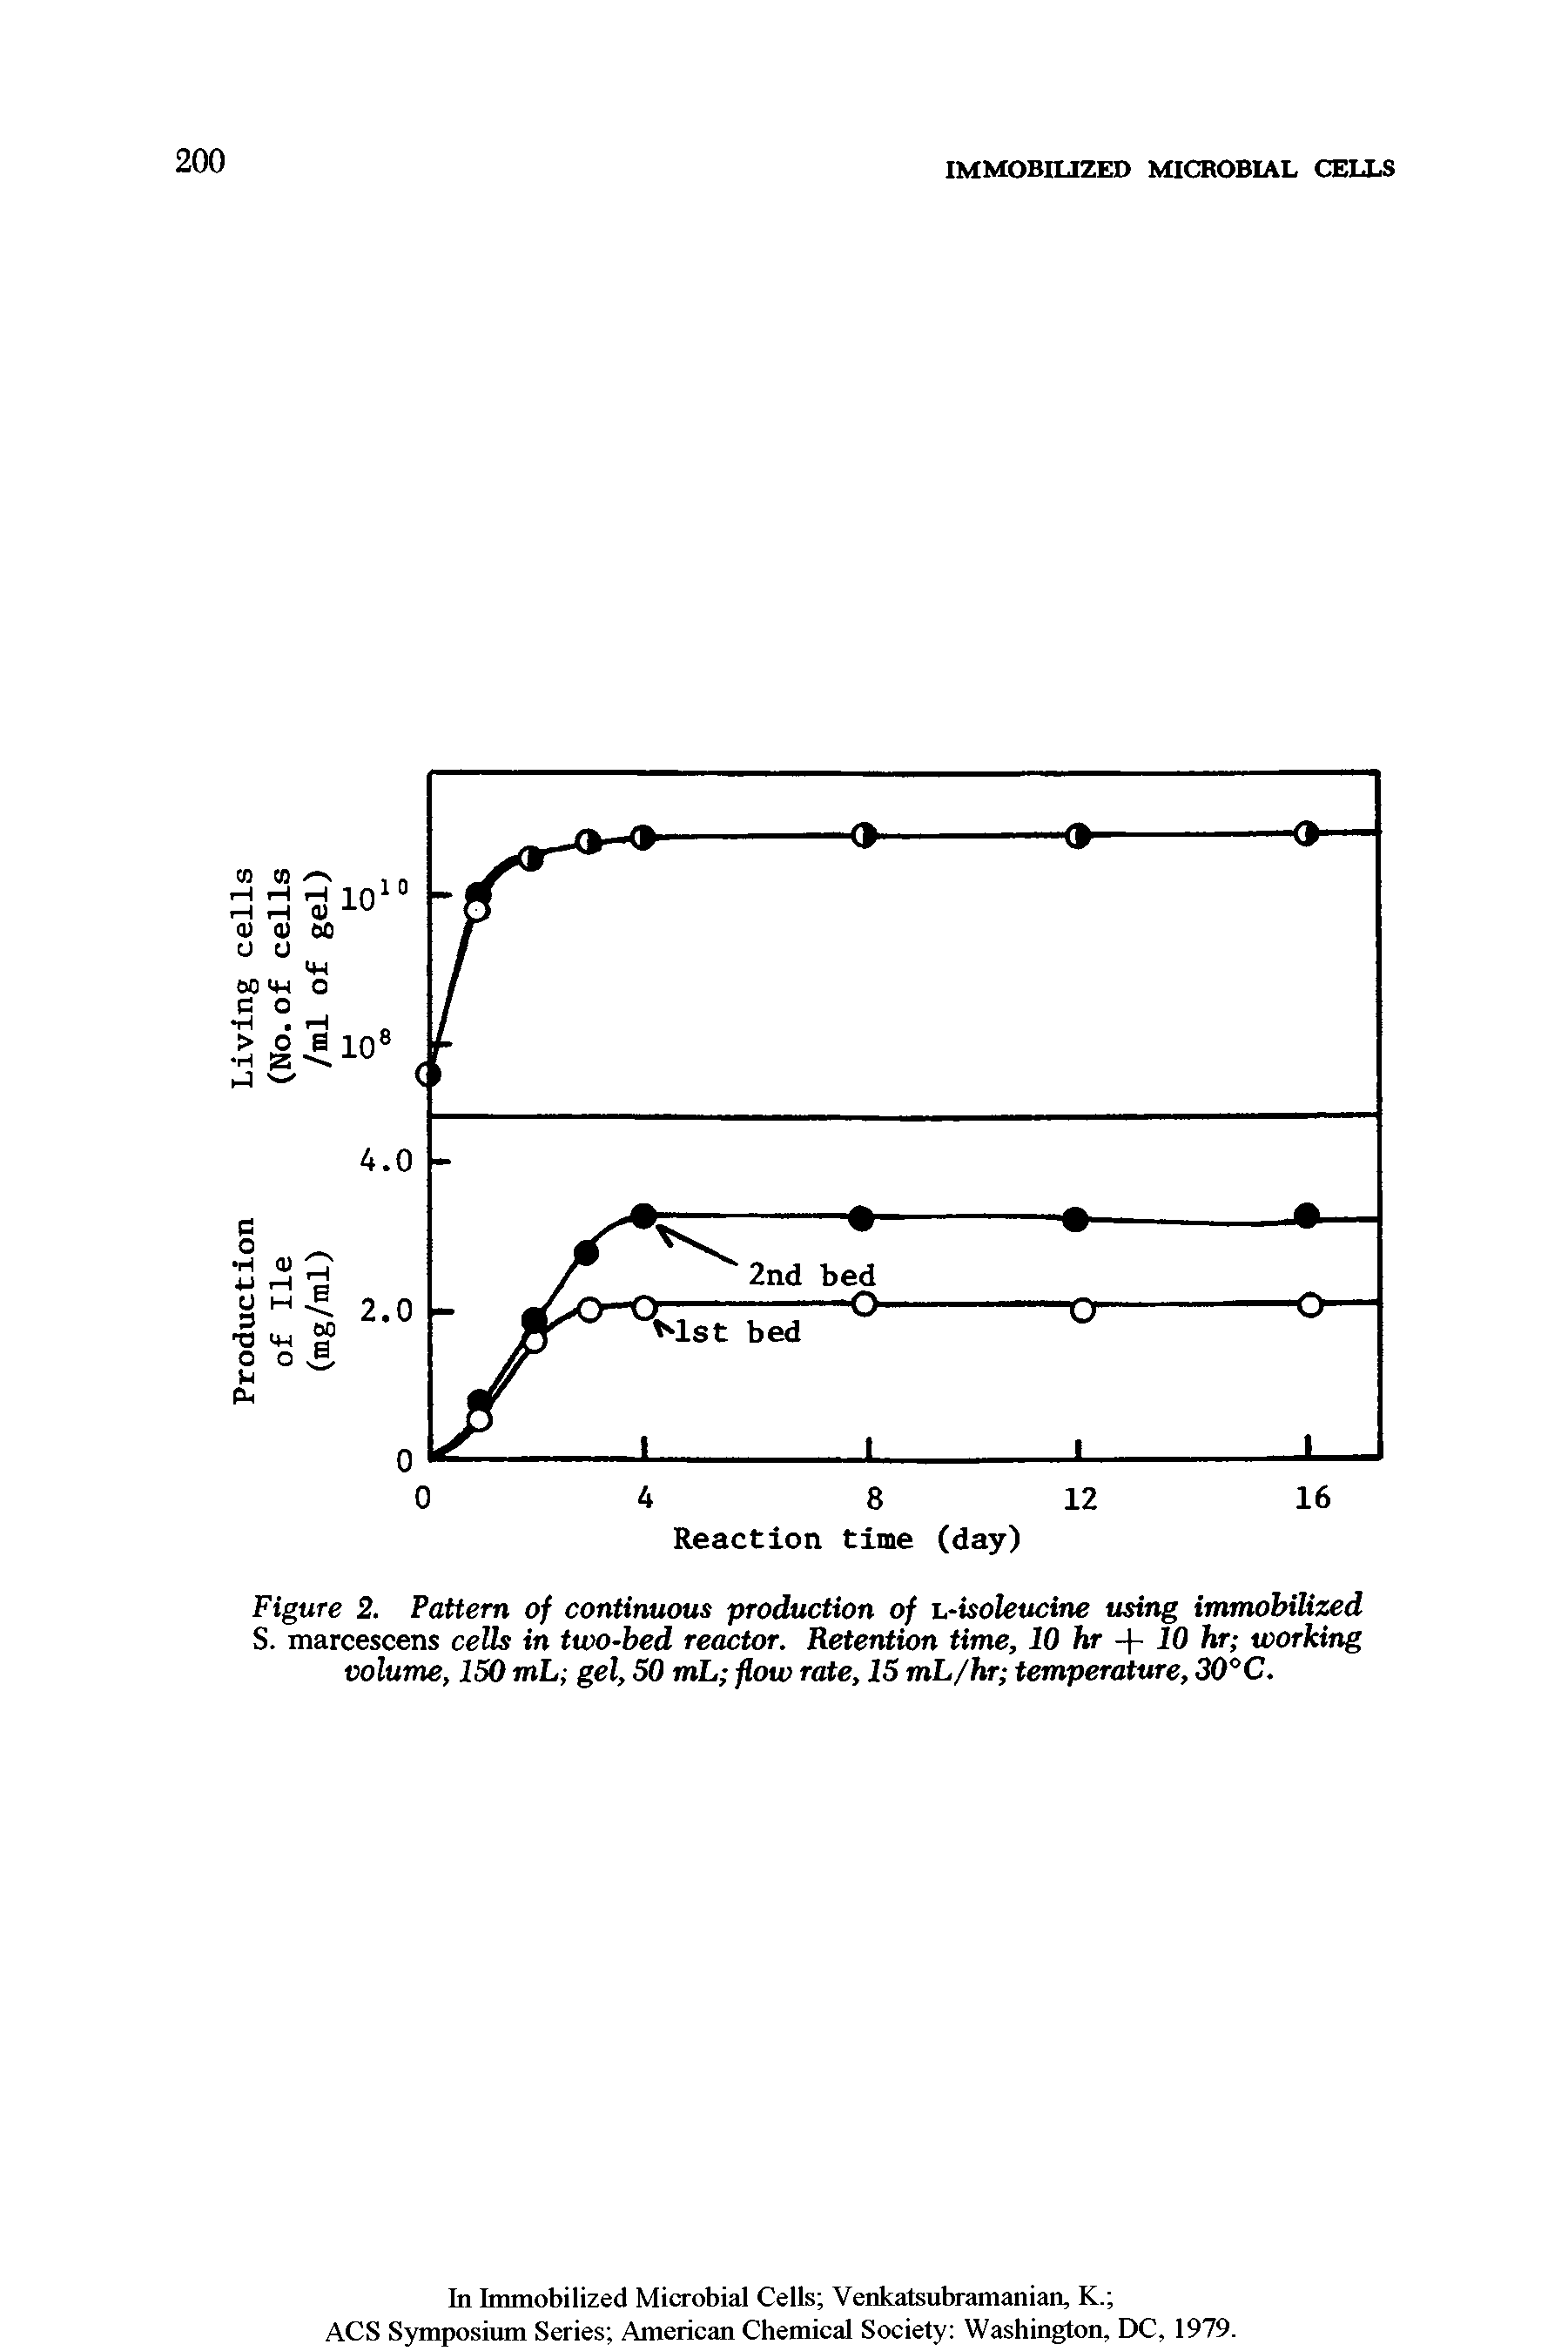 Figure 2. Pattern of continuous production of L-isoleucine using immobilized S. marcescens cells in two-bed reactor. Retention time, 10 hr + 10 hr working volume, 150 mL gel, 50 mL flow rate, 15 mL/hr temperature, 30°C.